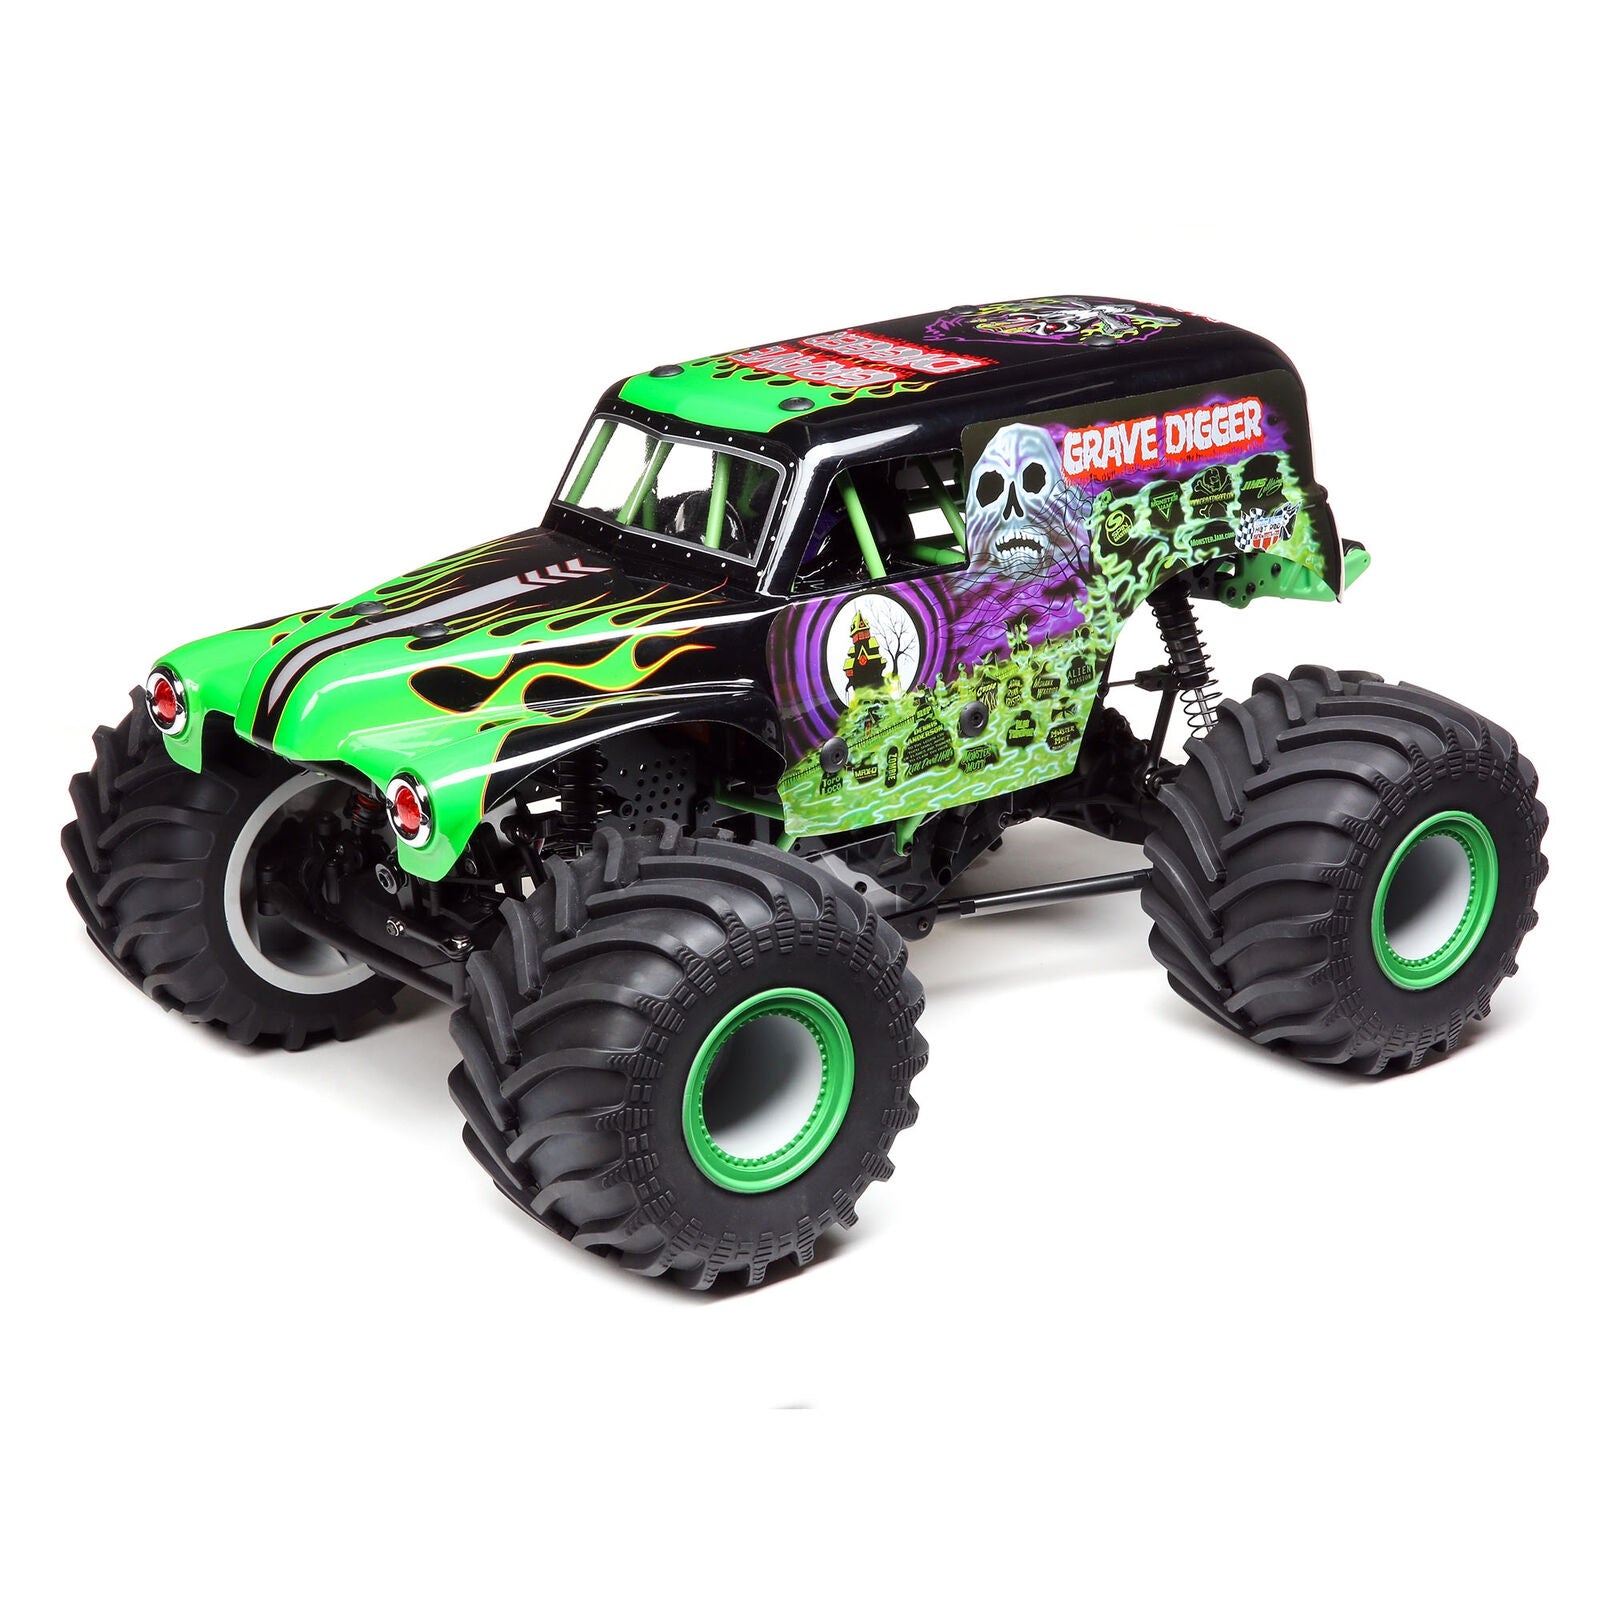 Losi 1/10 4WD Monster Truck RTR Brushless LMT Solid Axle Grave Digger - Green LOS04021T1